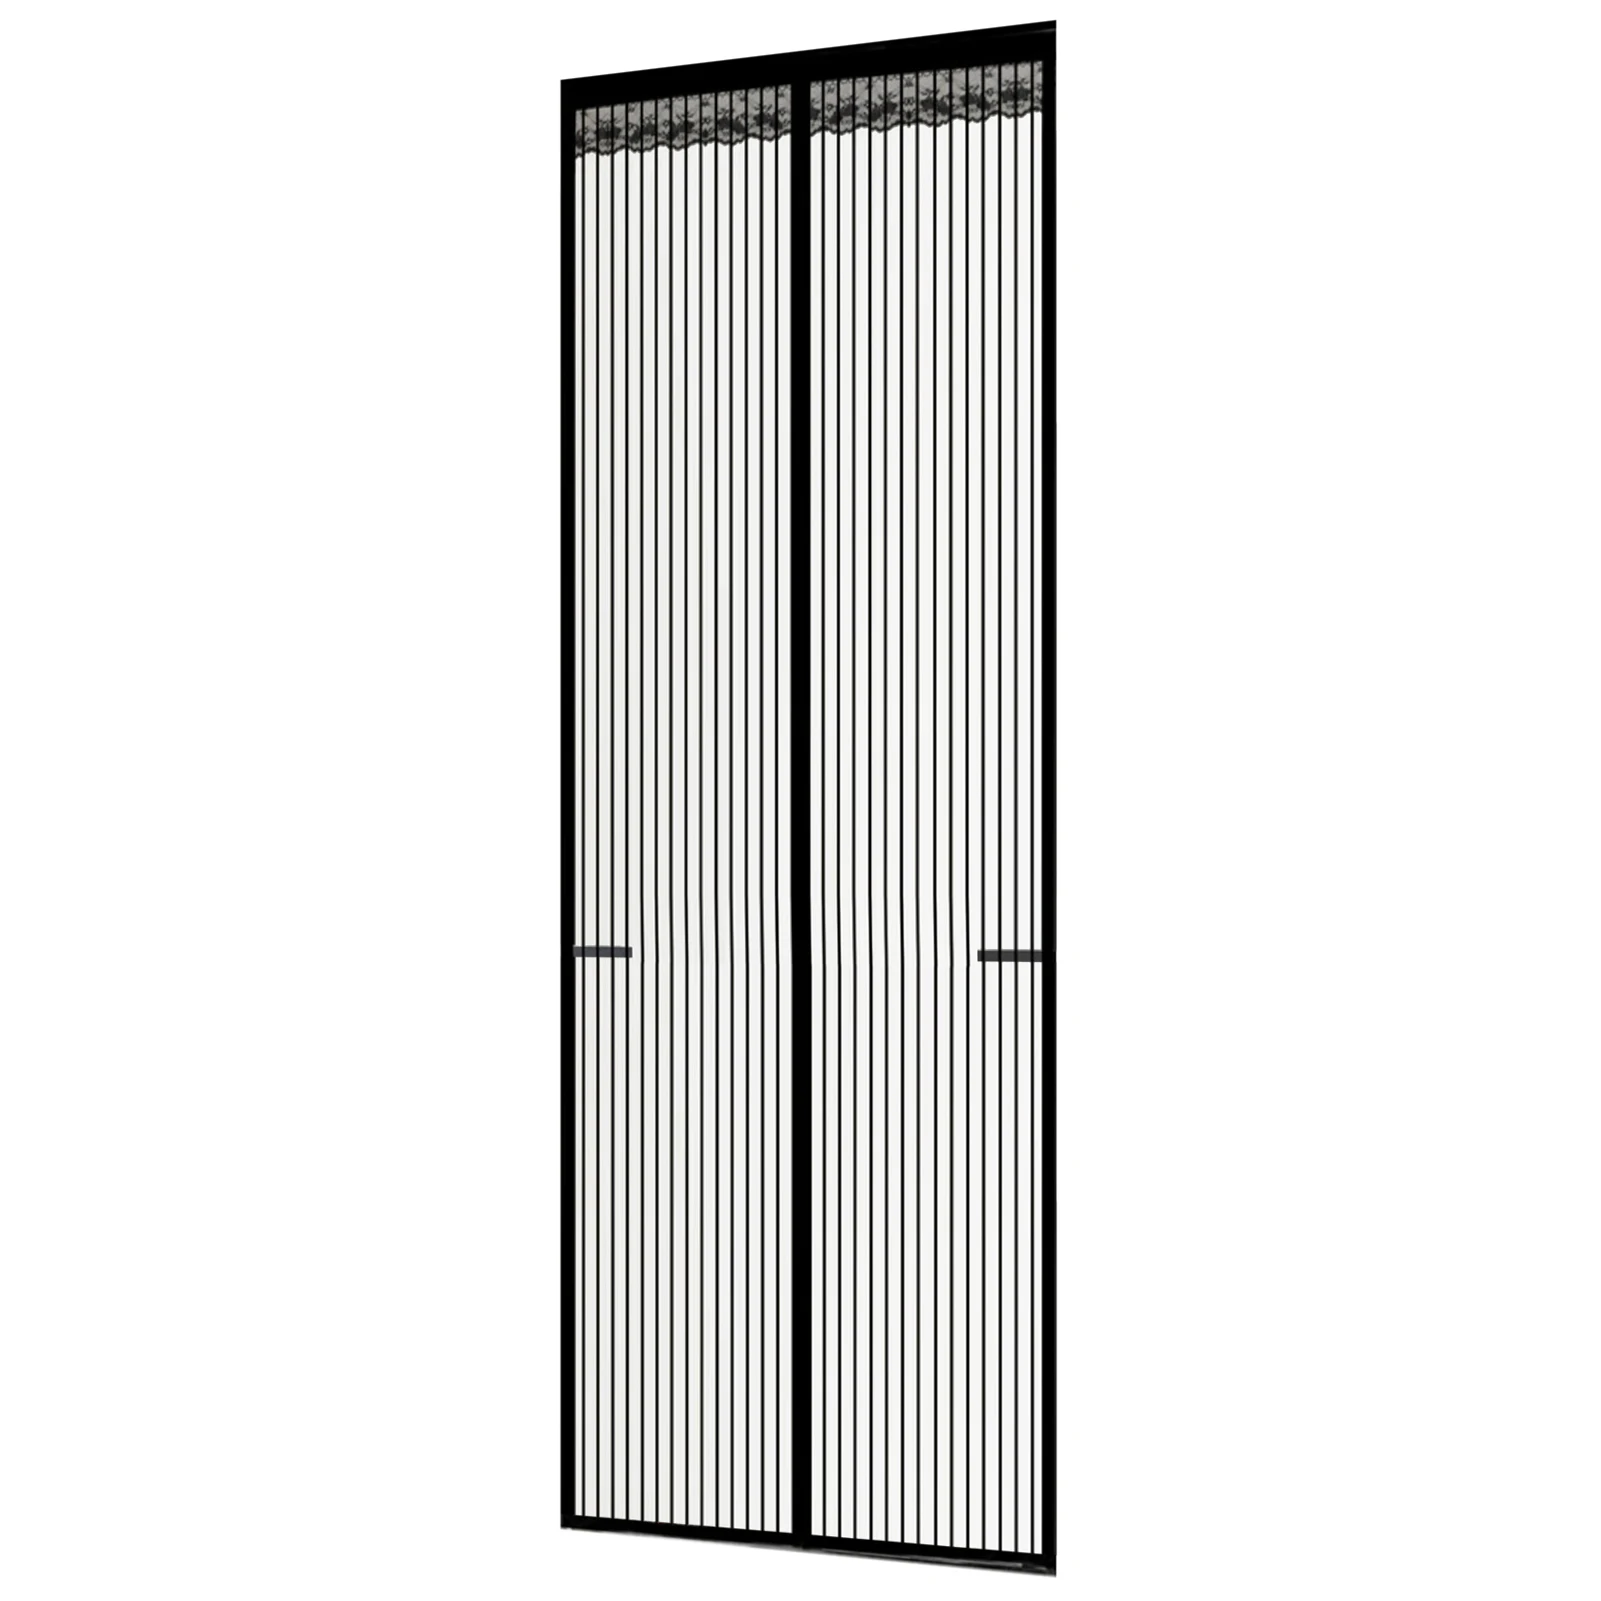 

Anti Fly Insect Magnetic Screen Door Mesh Automatic Closing Magnetic Door Hands-Free Net Easy Install Mosquito Nets For Doors